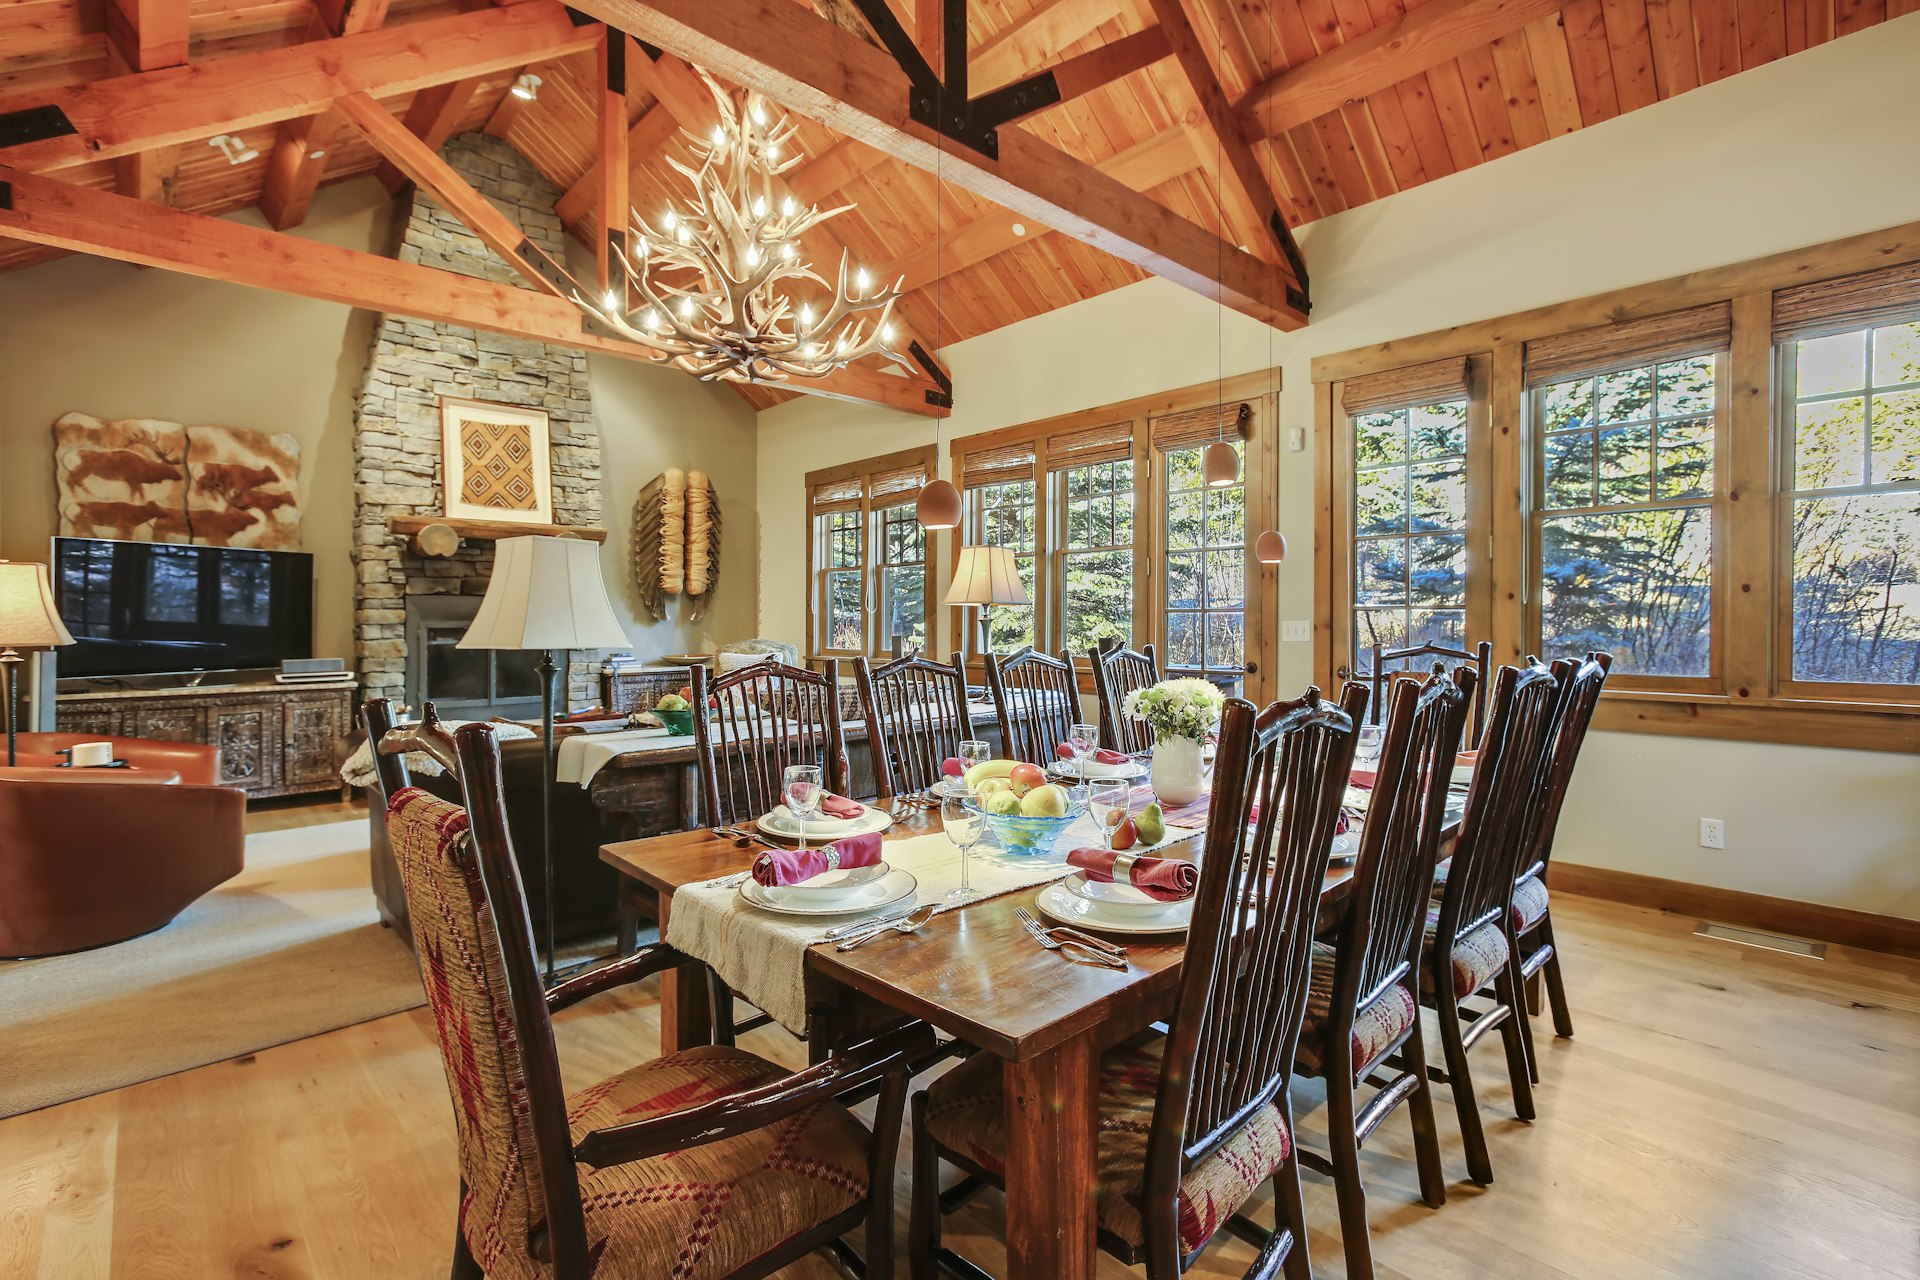 The open-plan living space at Granite Ridge, with a dining table, stone fireplace, and windows looking out on the Tetons